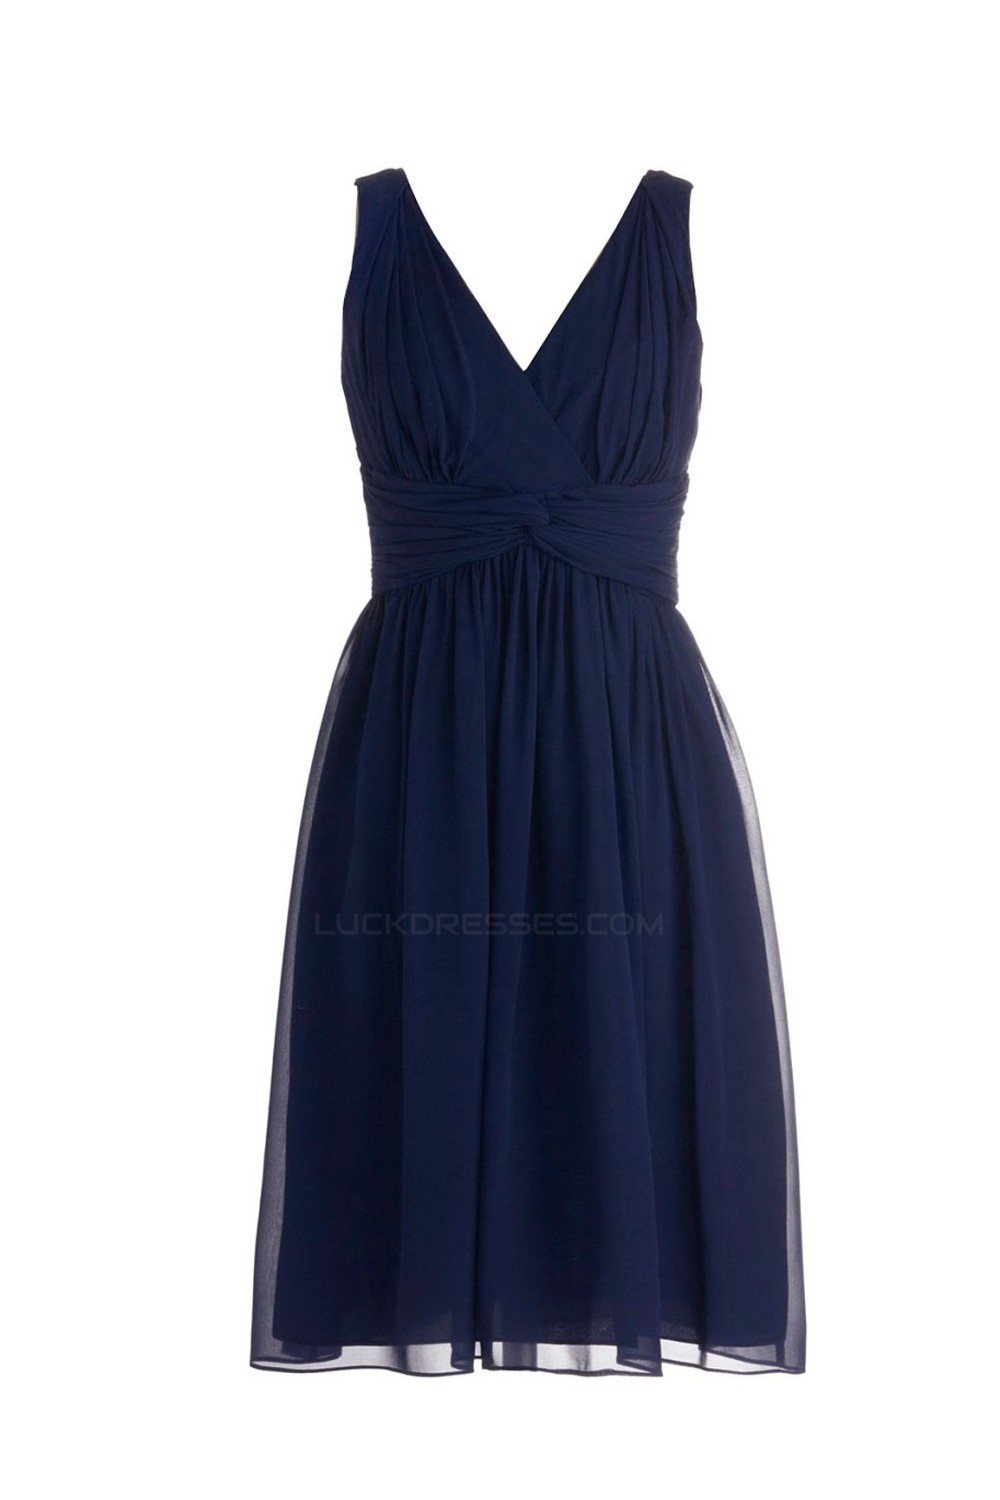 navy blue gowns for wedding